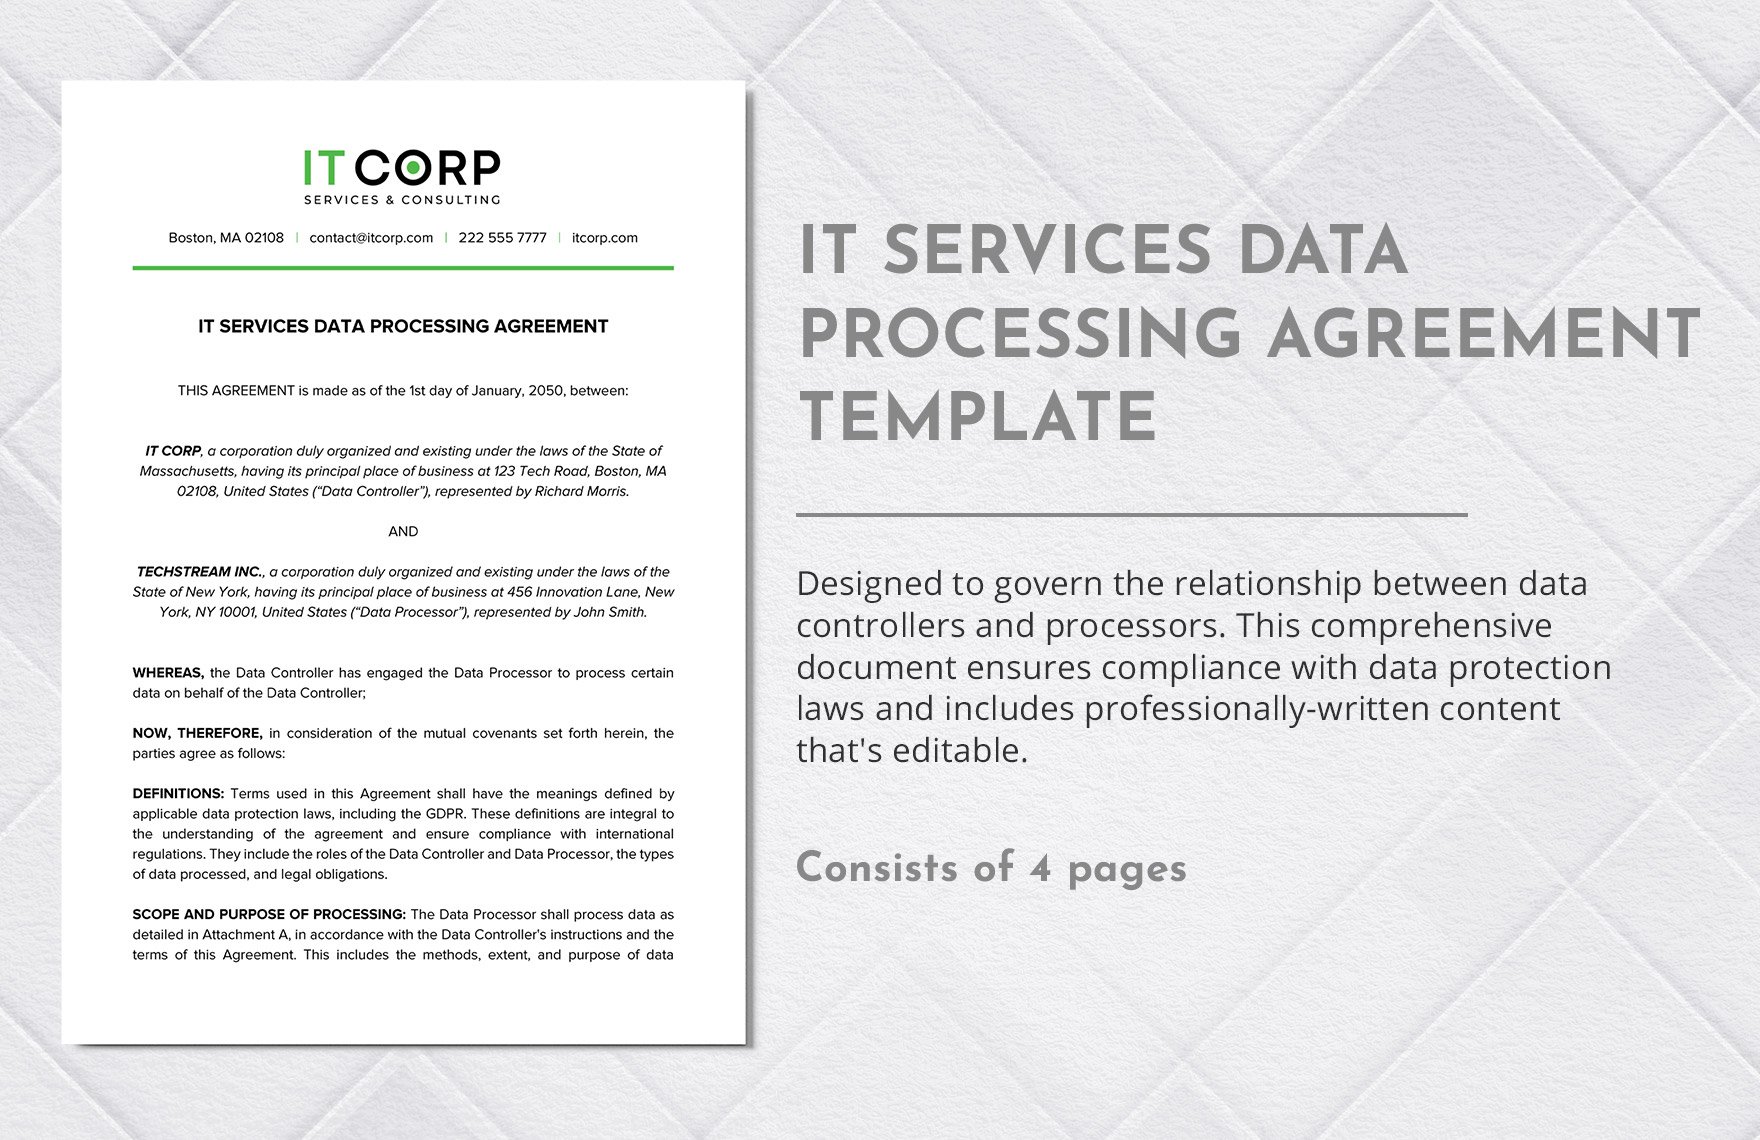 IT Services Data Processing Agreement Template